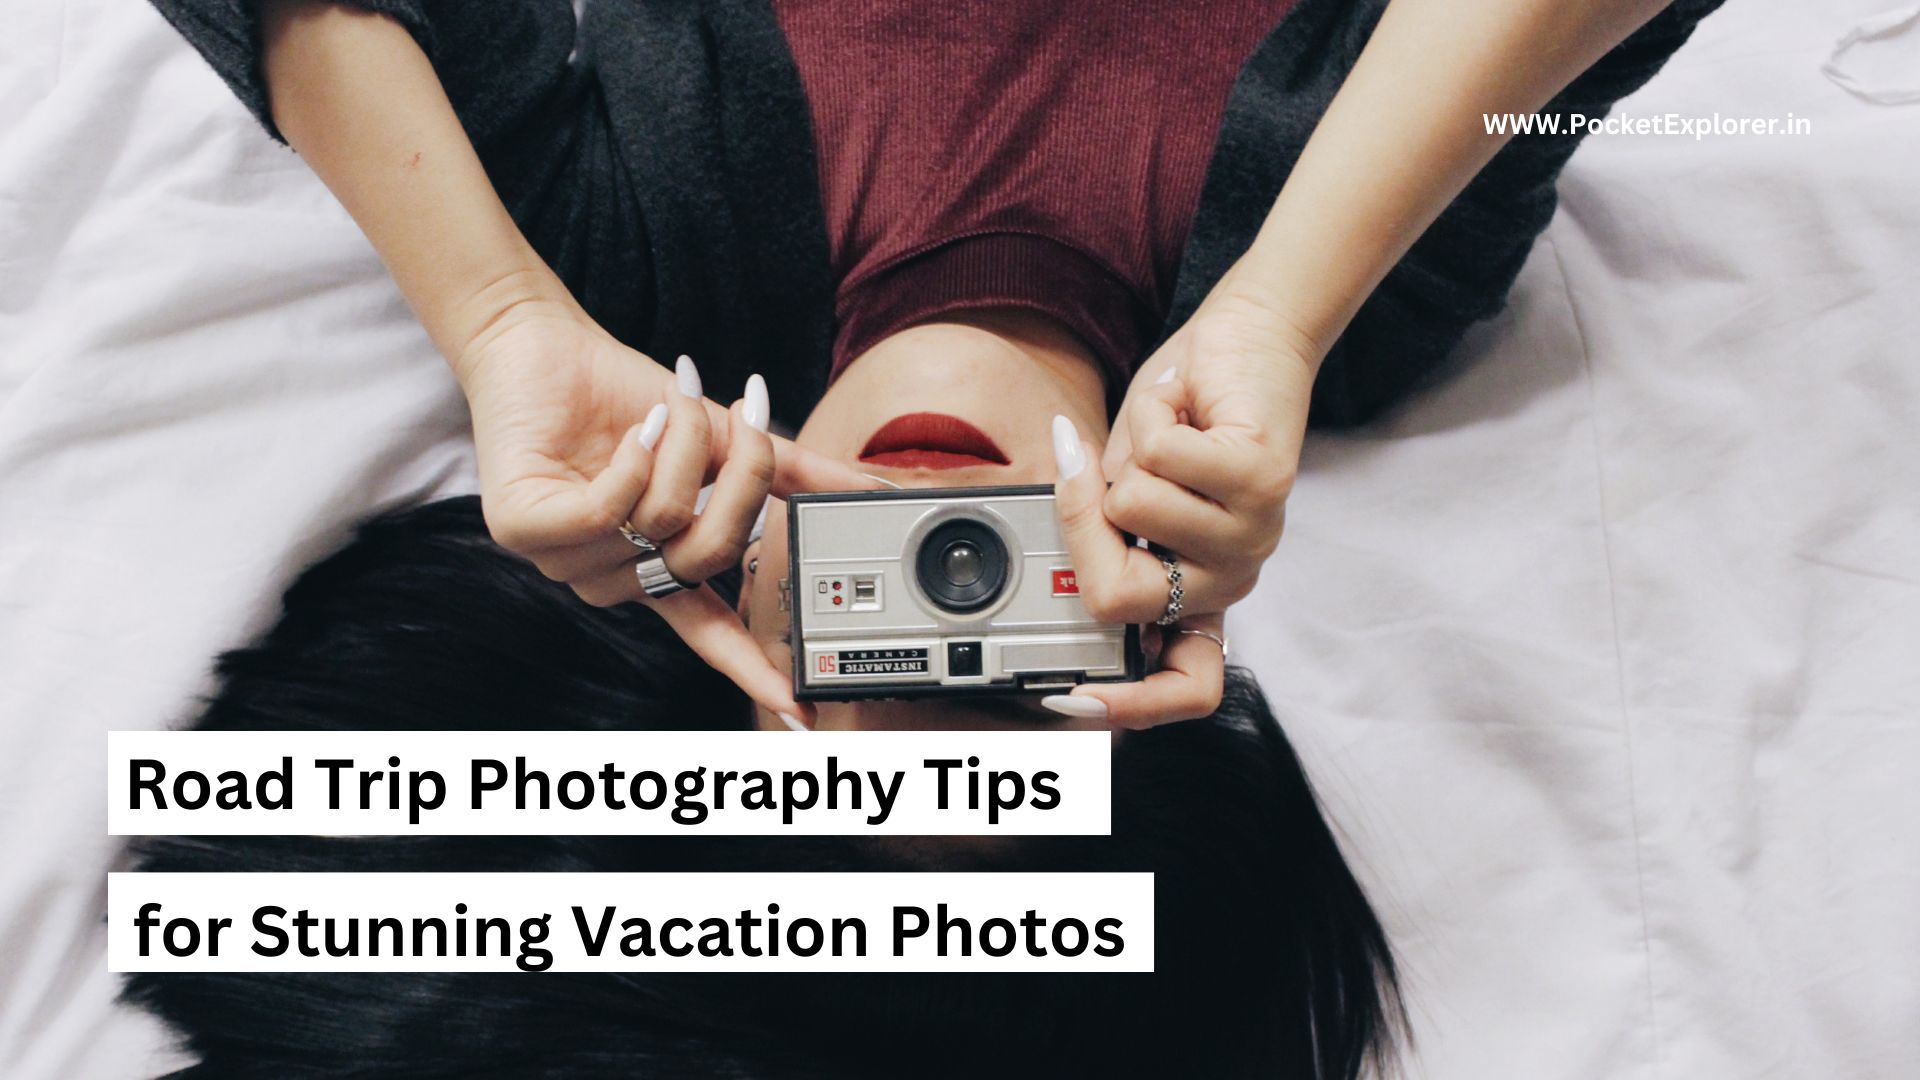 Road Trip Photography Tips for Stunning Vacation Photos